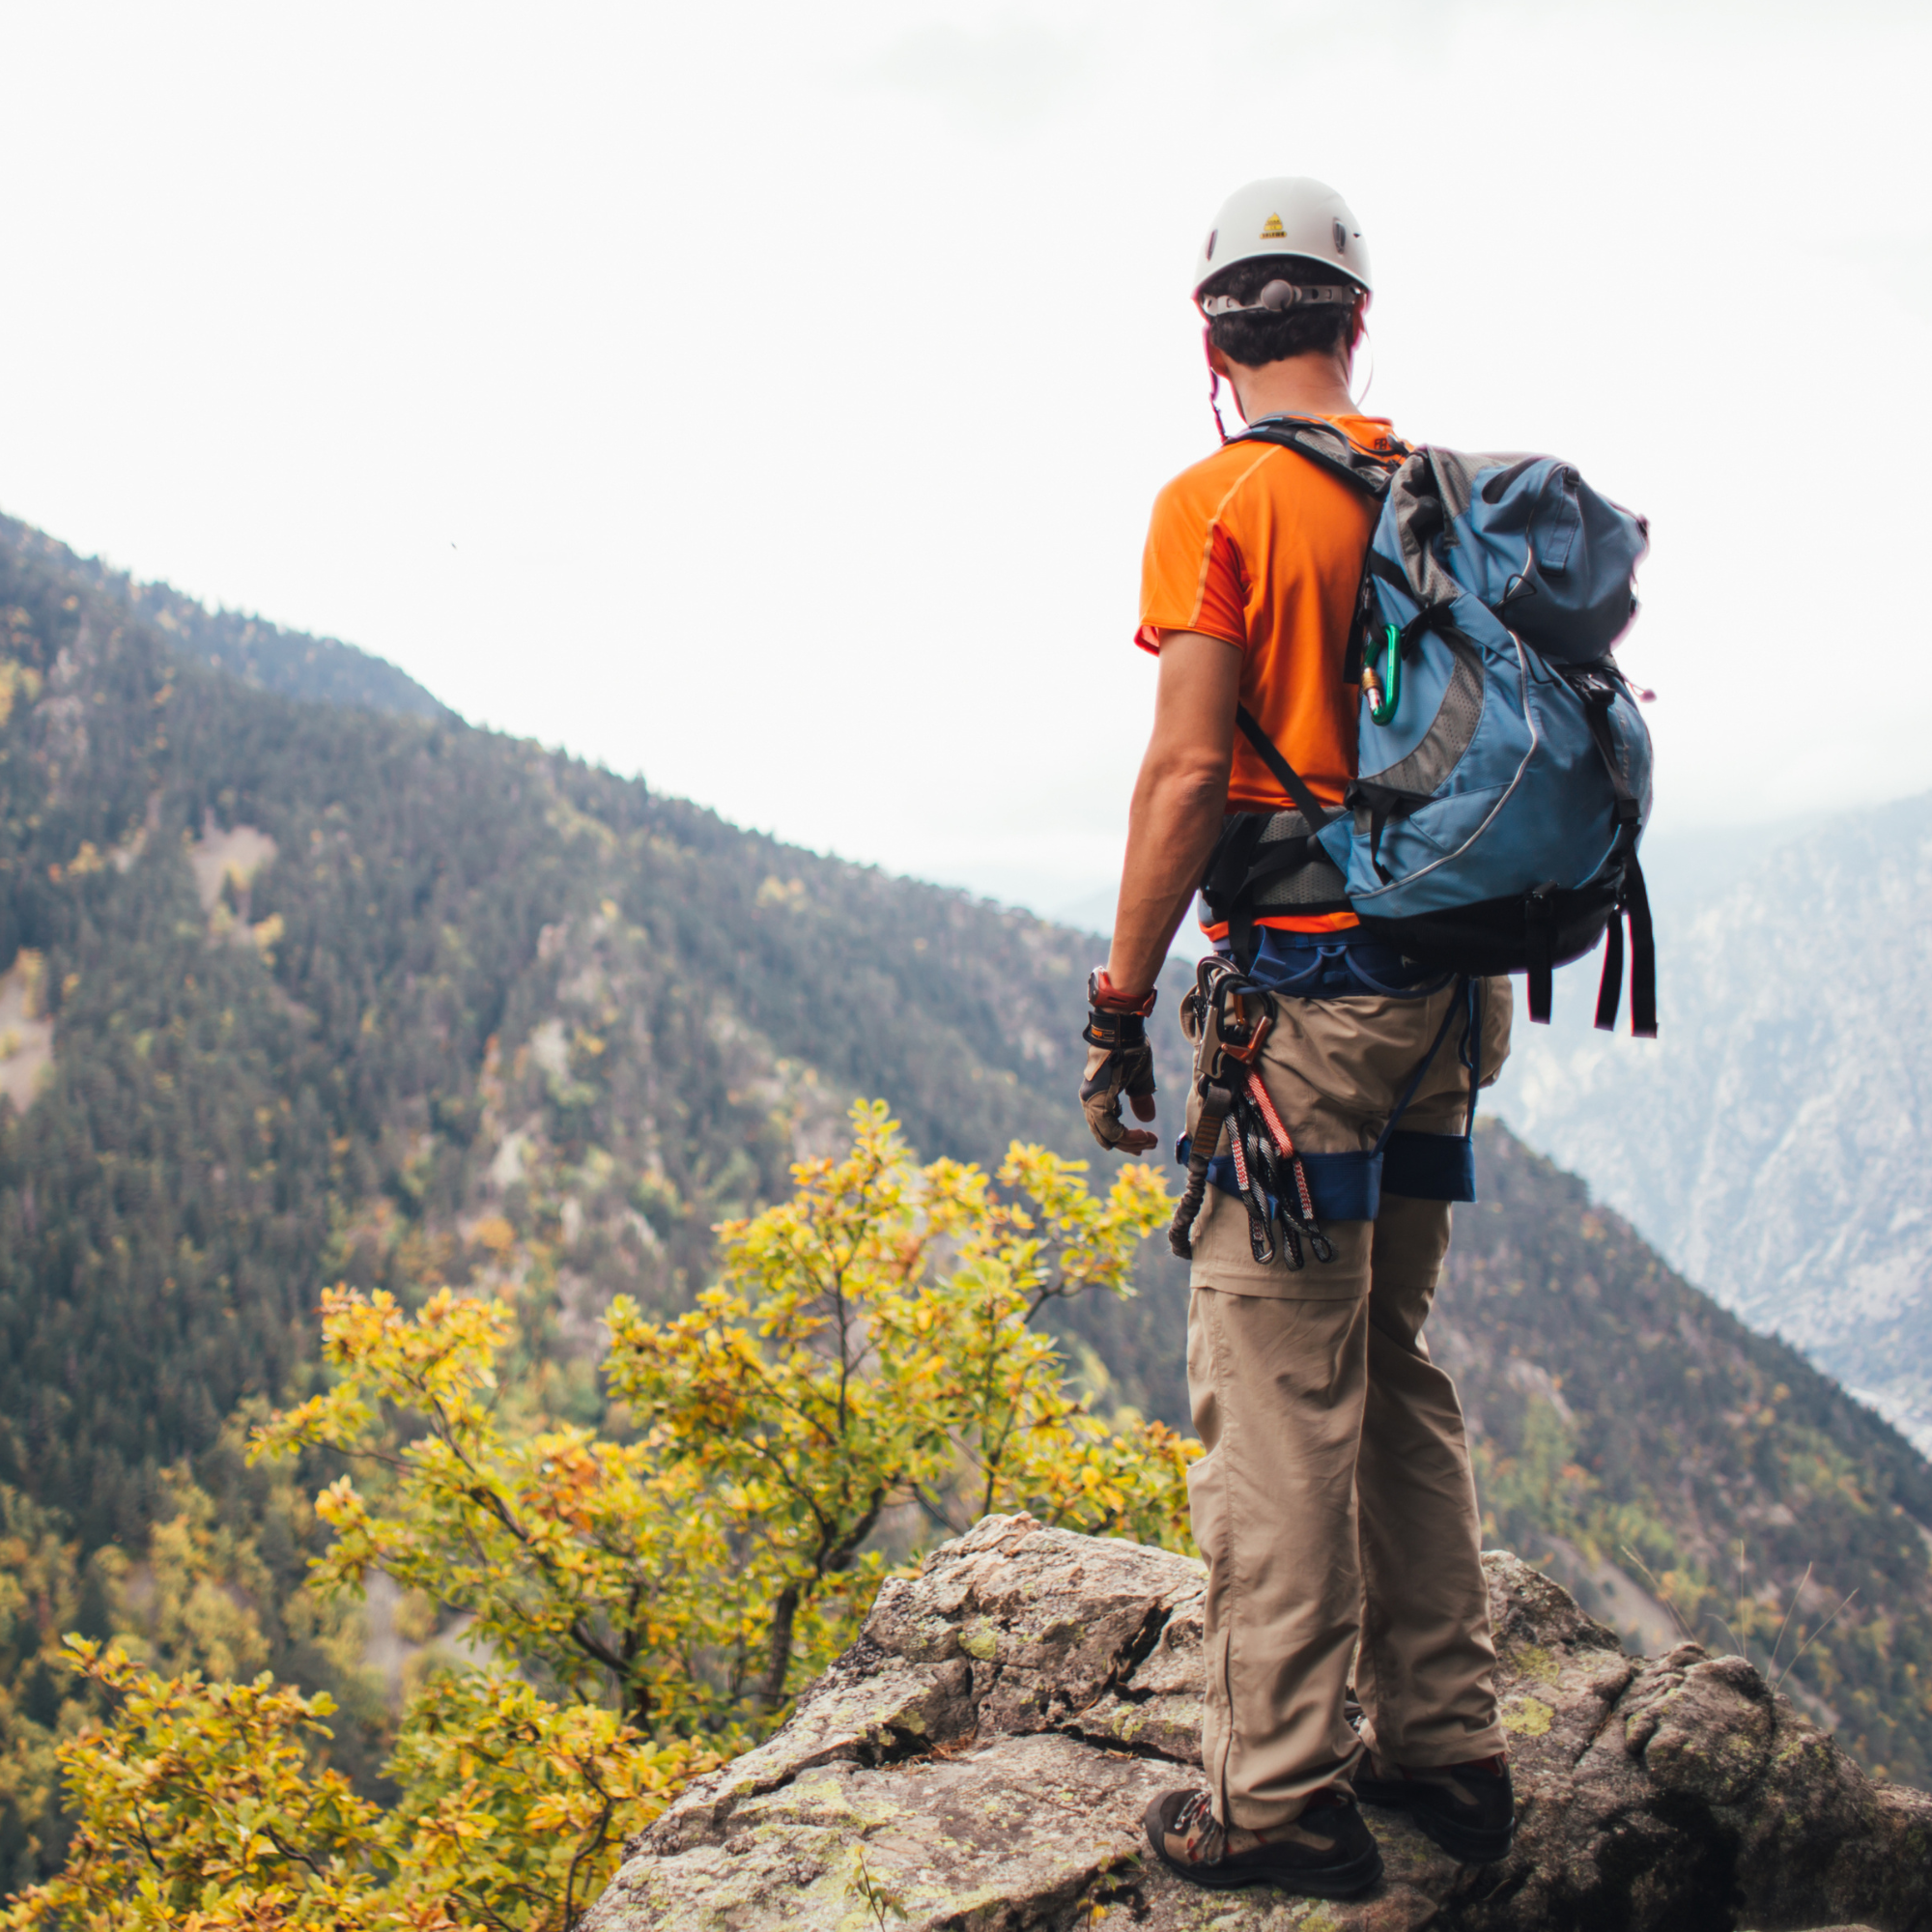 Choosing the Perfect Pack: Key Features to Consider